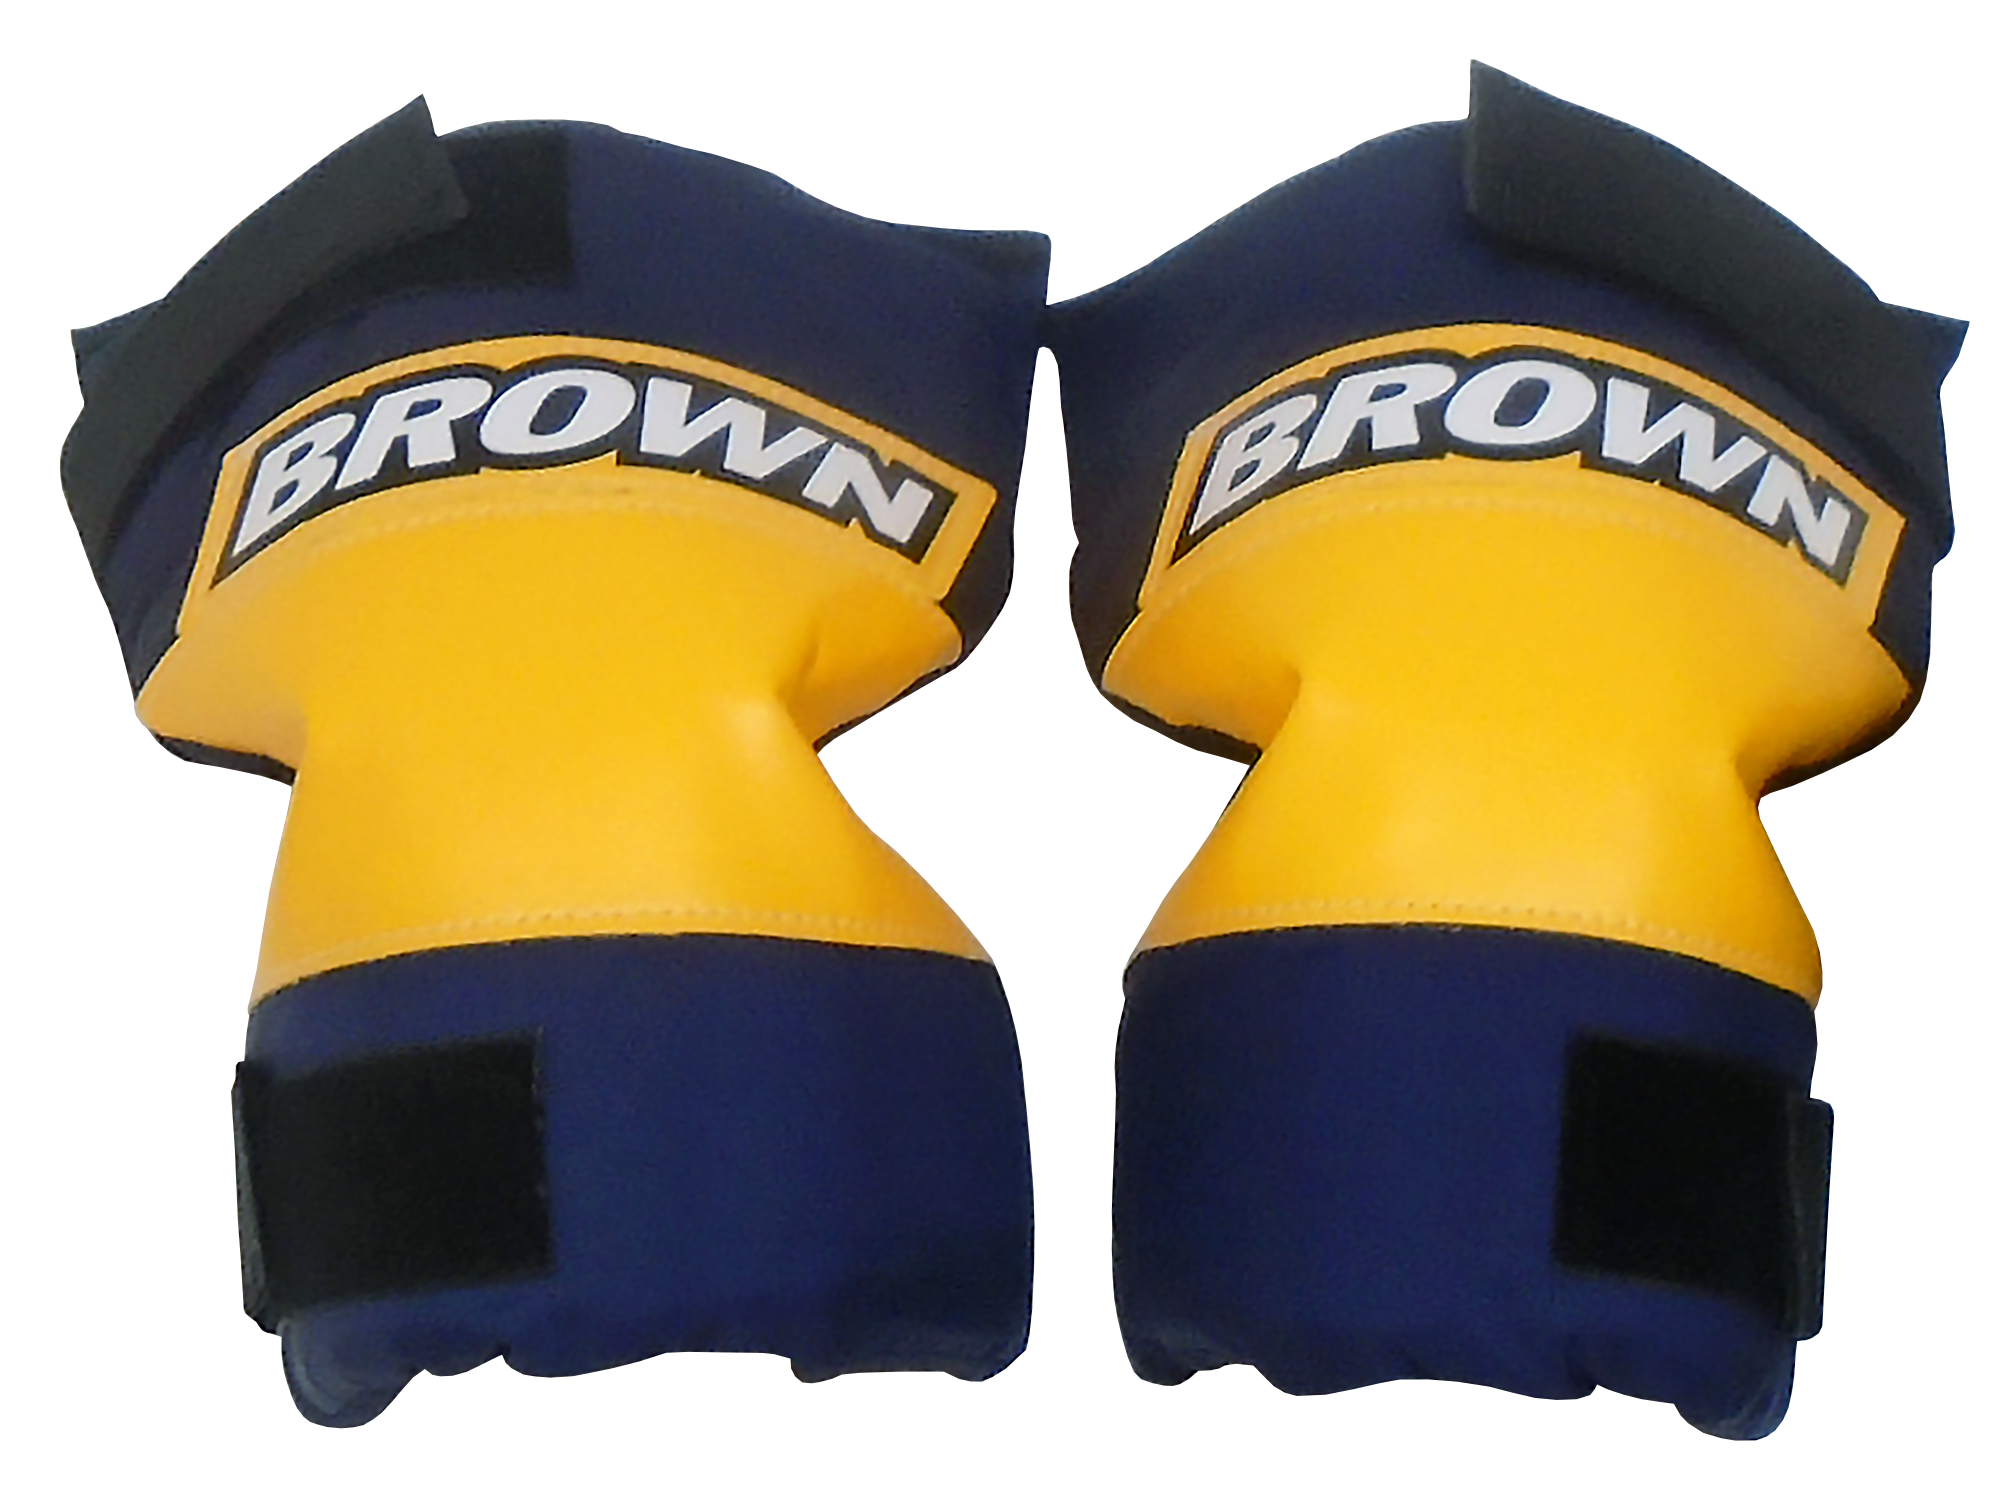 /img/equipment/knee-pads/2500/variations/yellow-blue/front.png